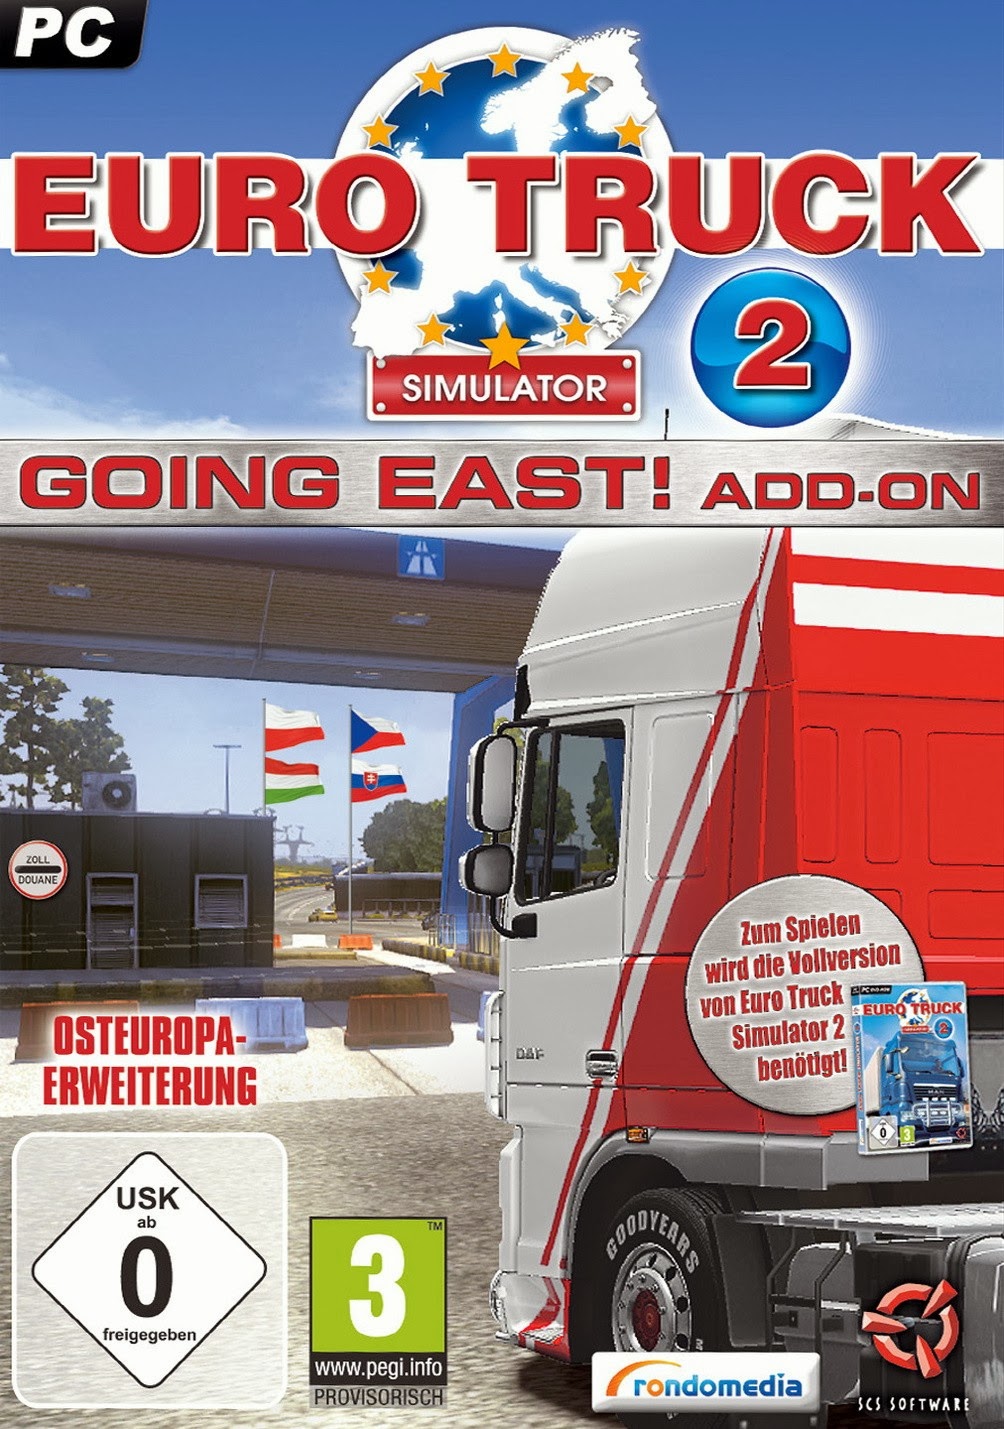 Euro Bus Simulator 2 Free Download Full Version Pc With Crack